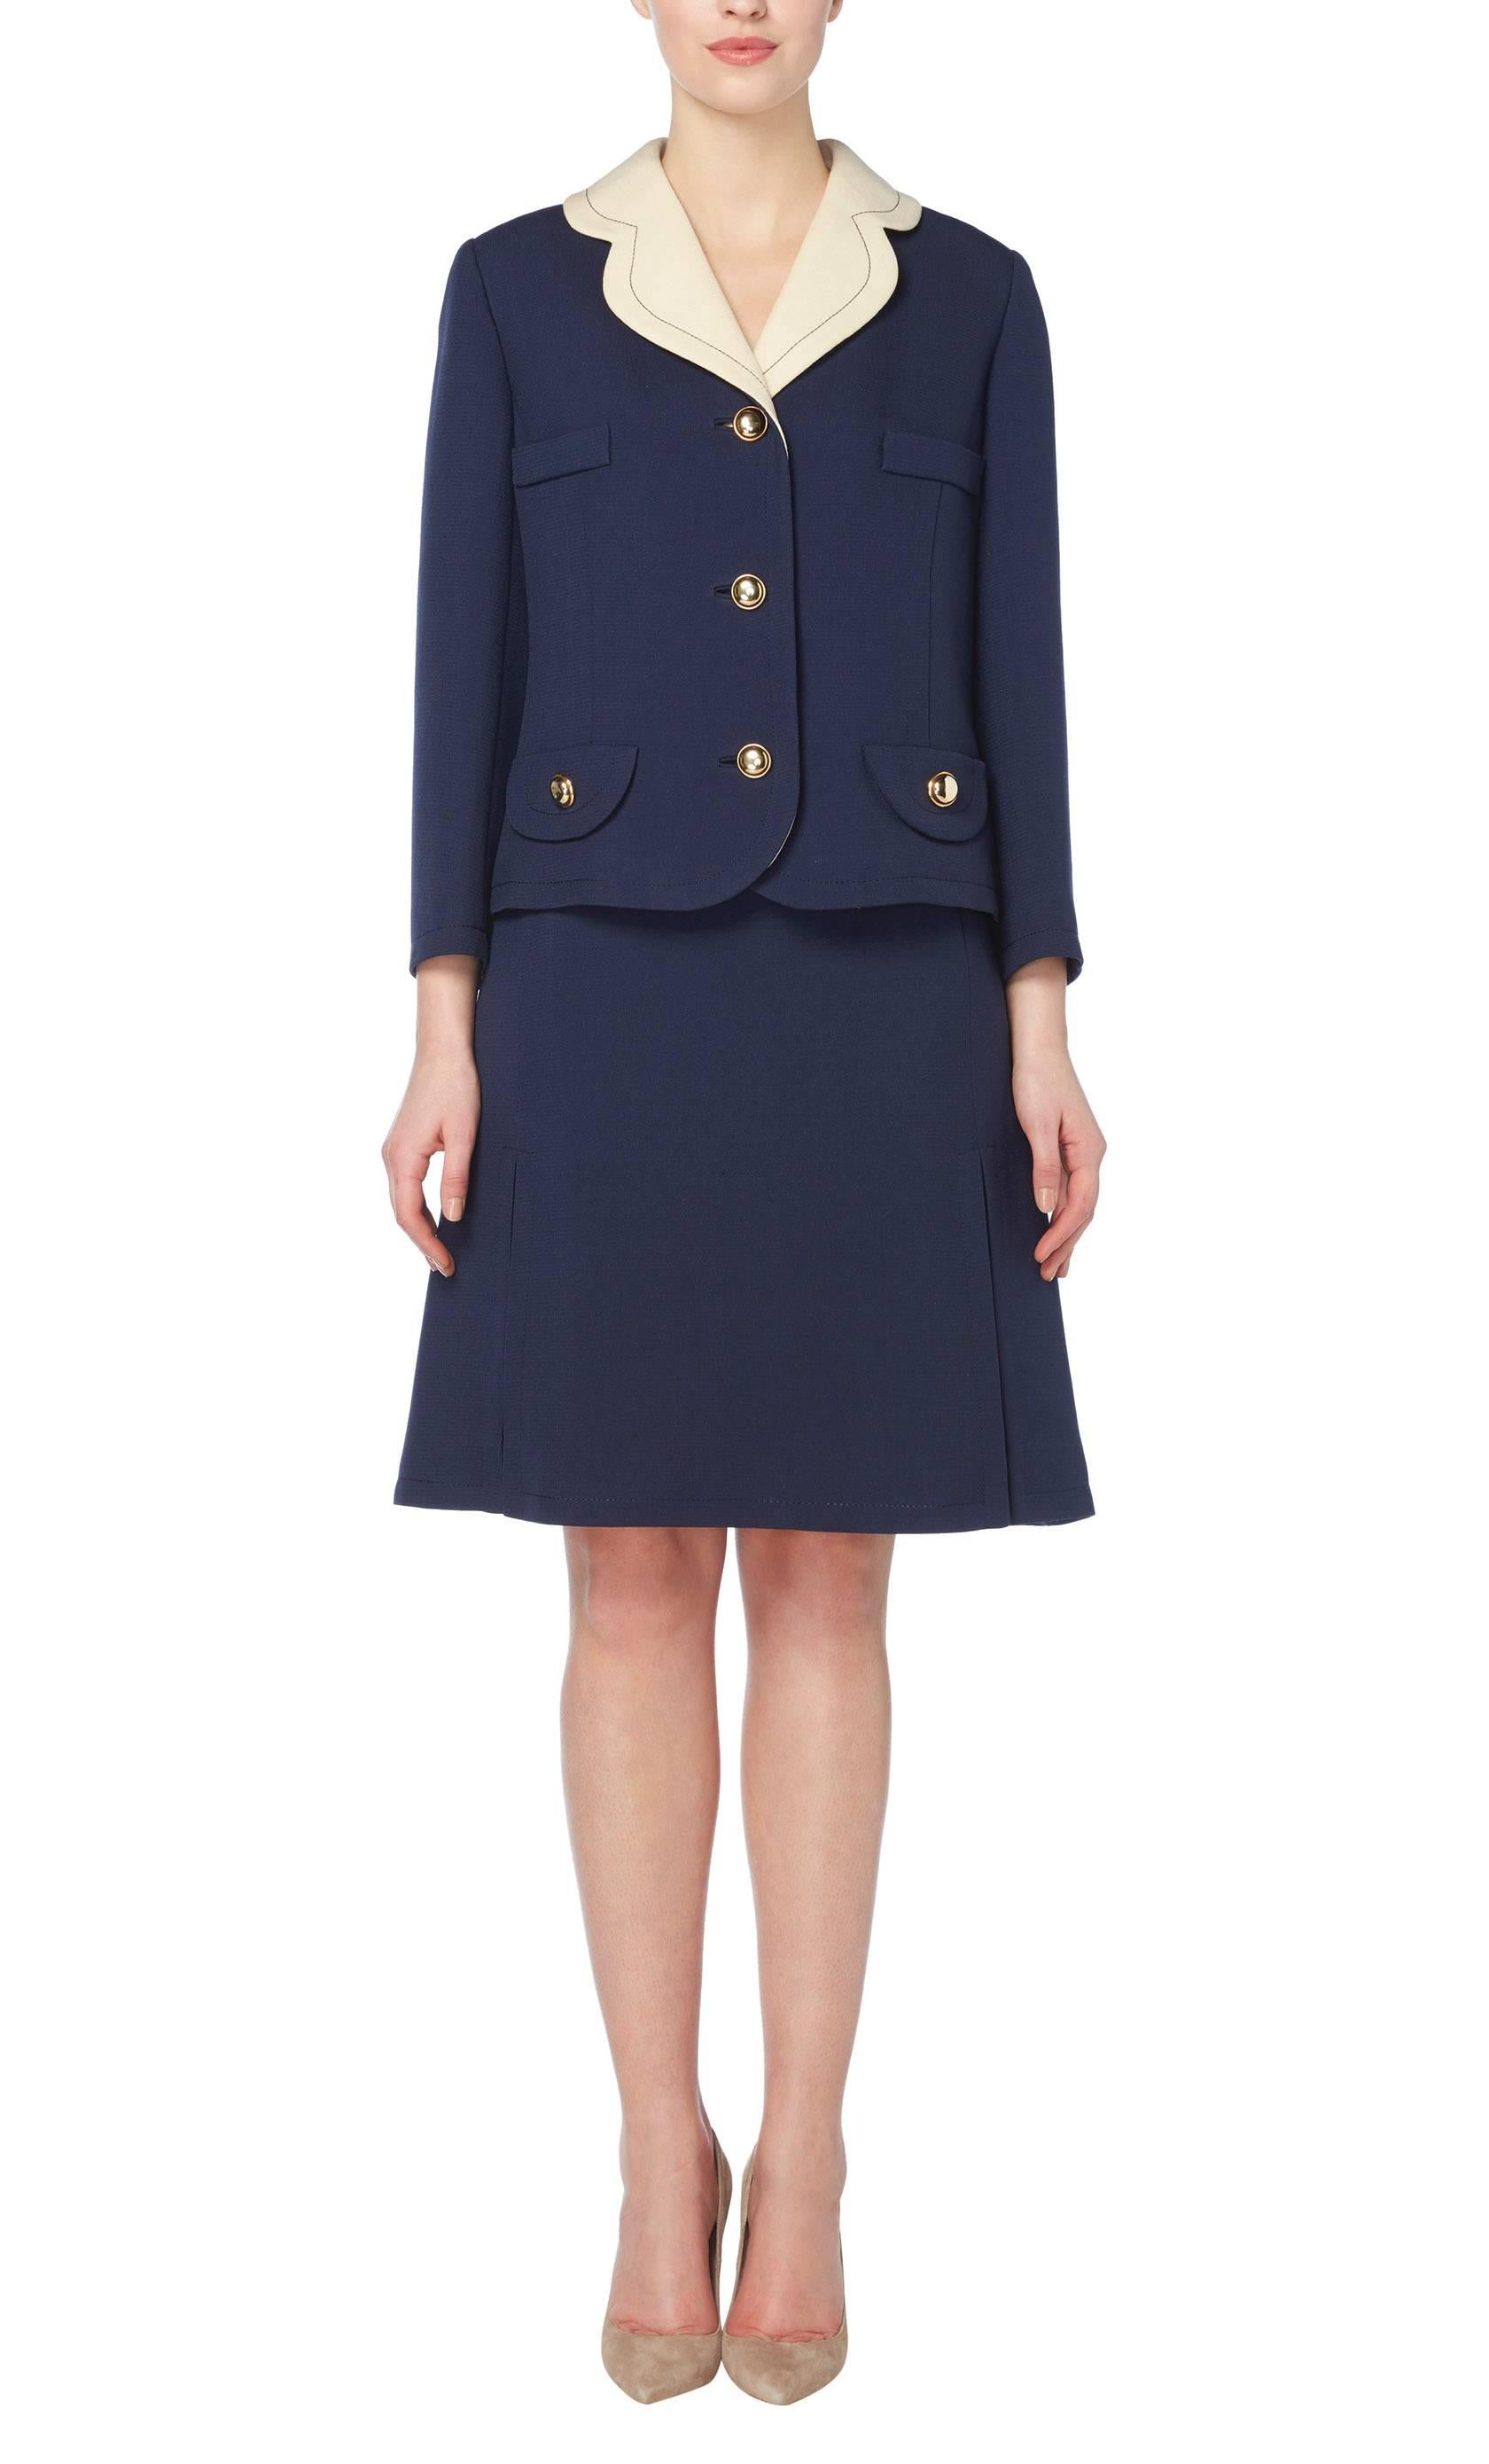 Perfect for the office or daytime events, this Jean Patou skirt suit has a nautical feel. Constructed in navy wool and featuring a contrasting ivory collar, the jacket fastens to the front and decorative pockets with gold metal buttons, while the